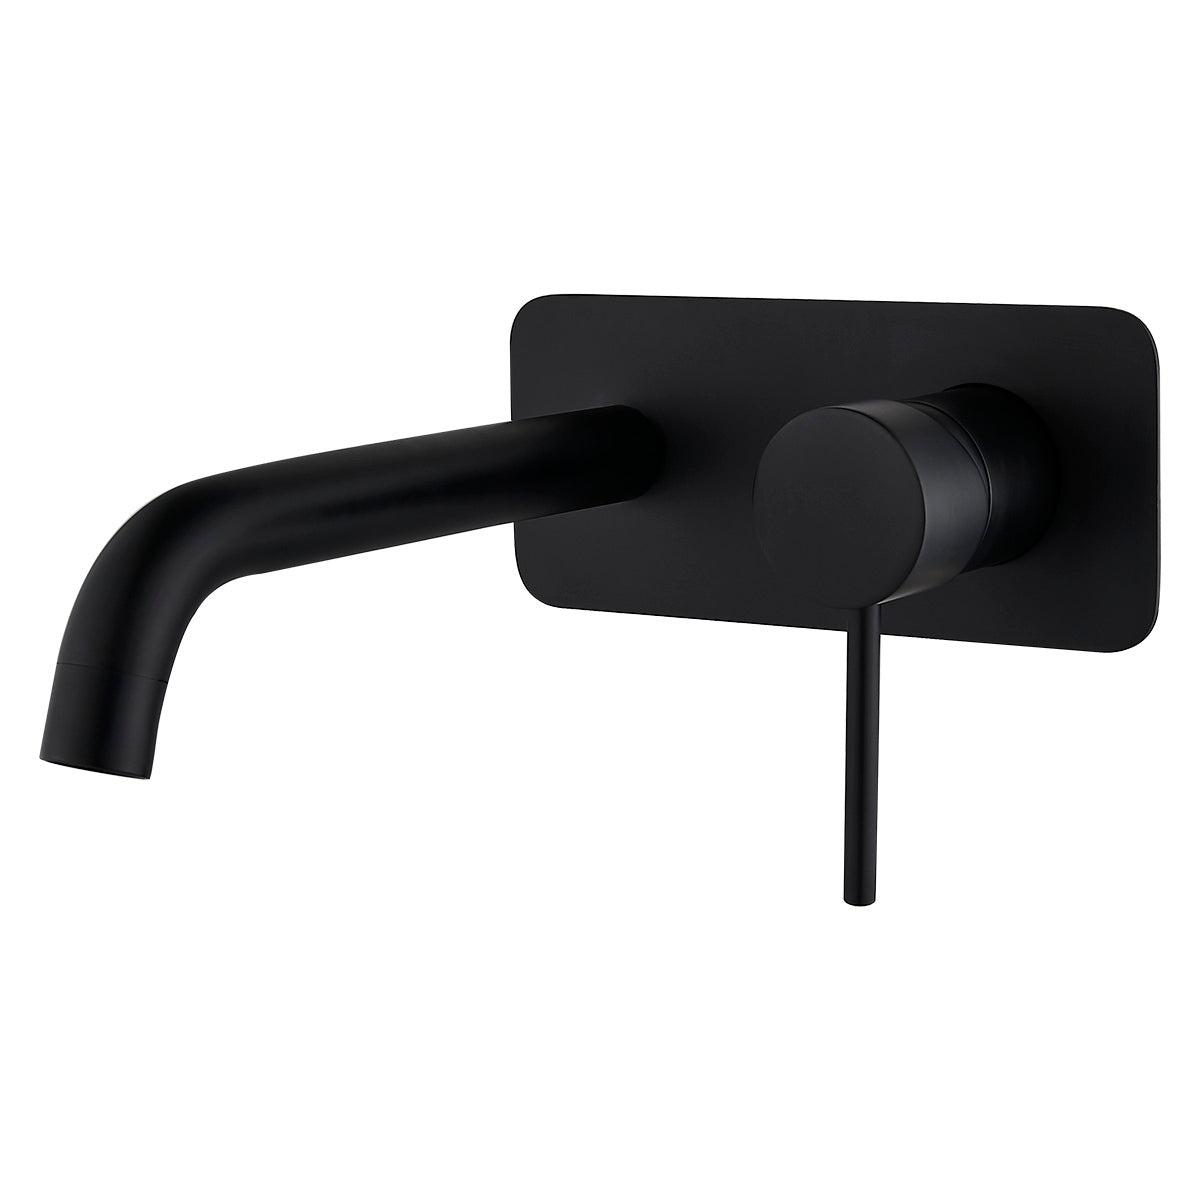 HELLYCAR IDEAL WALL MIXER WITH OUTLET 209MM BLACK